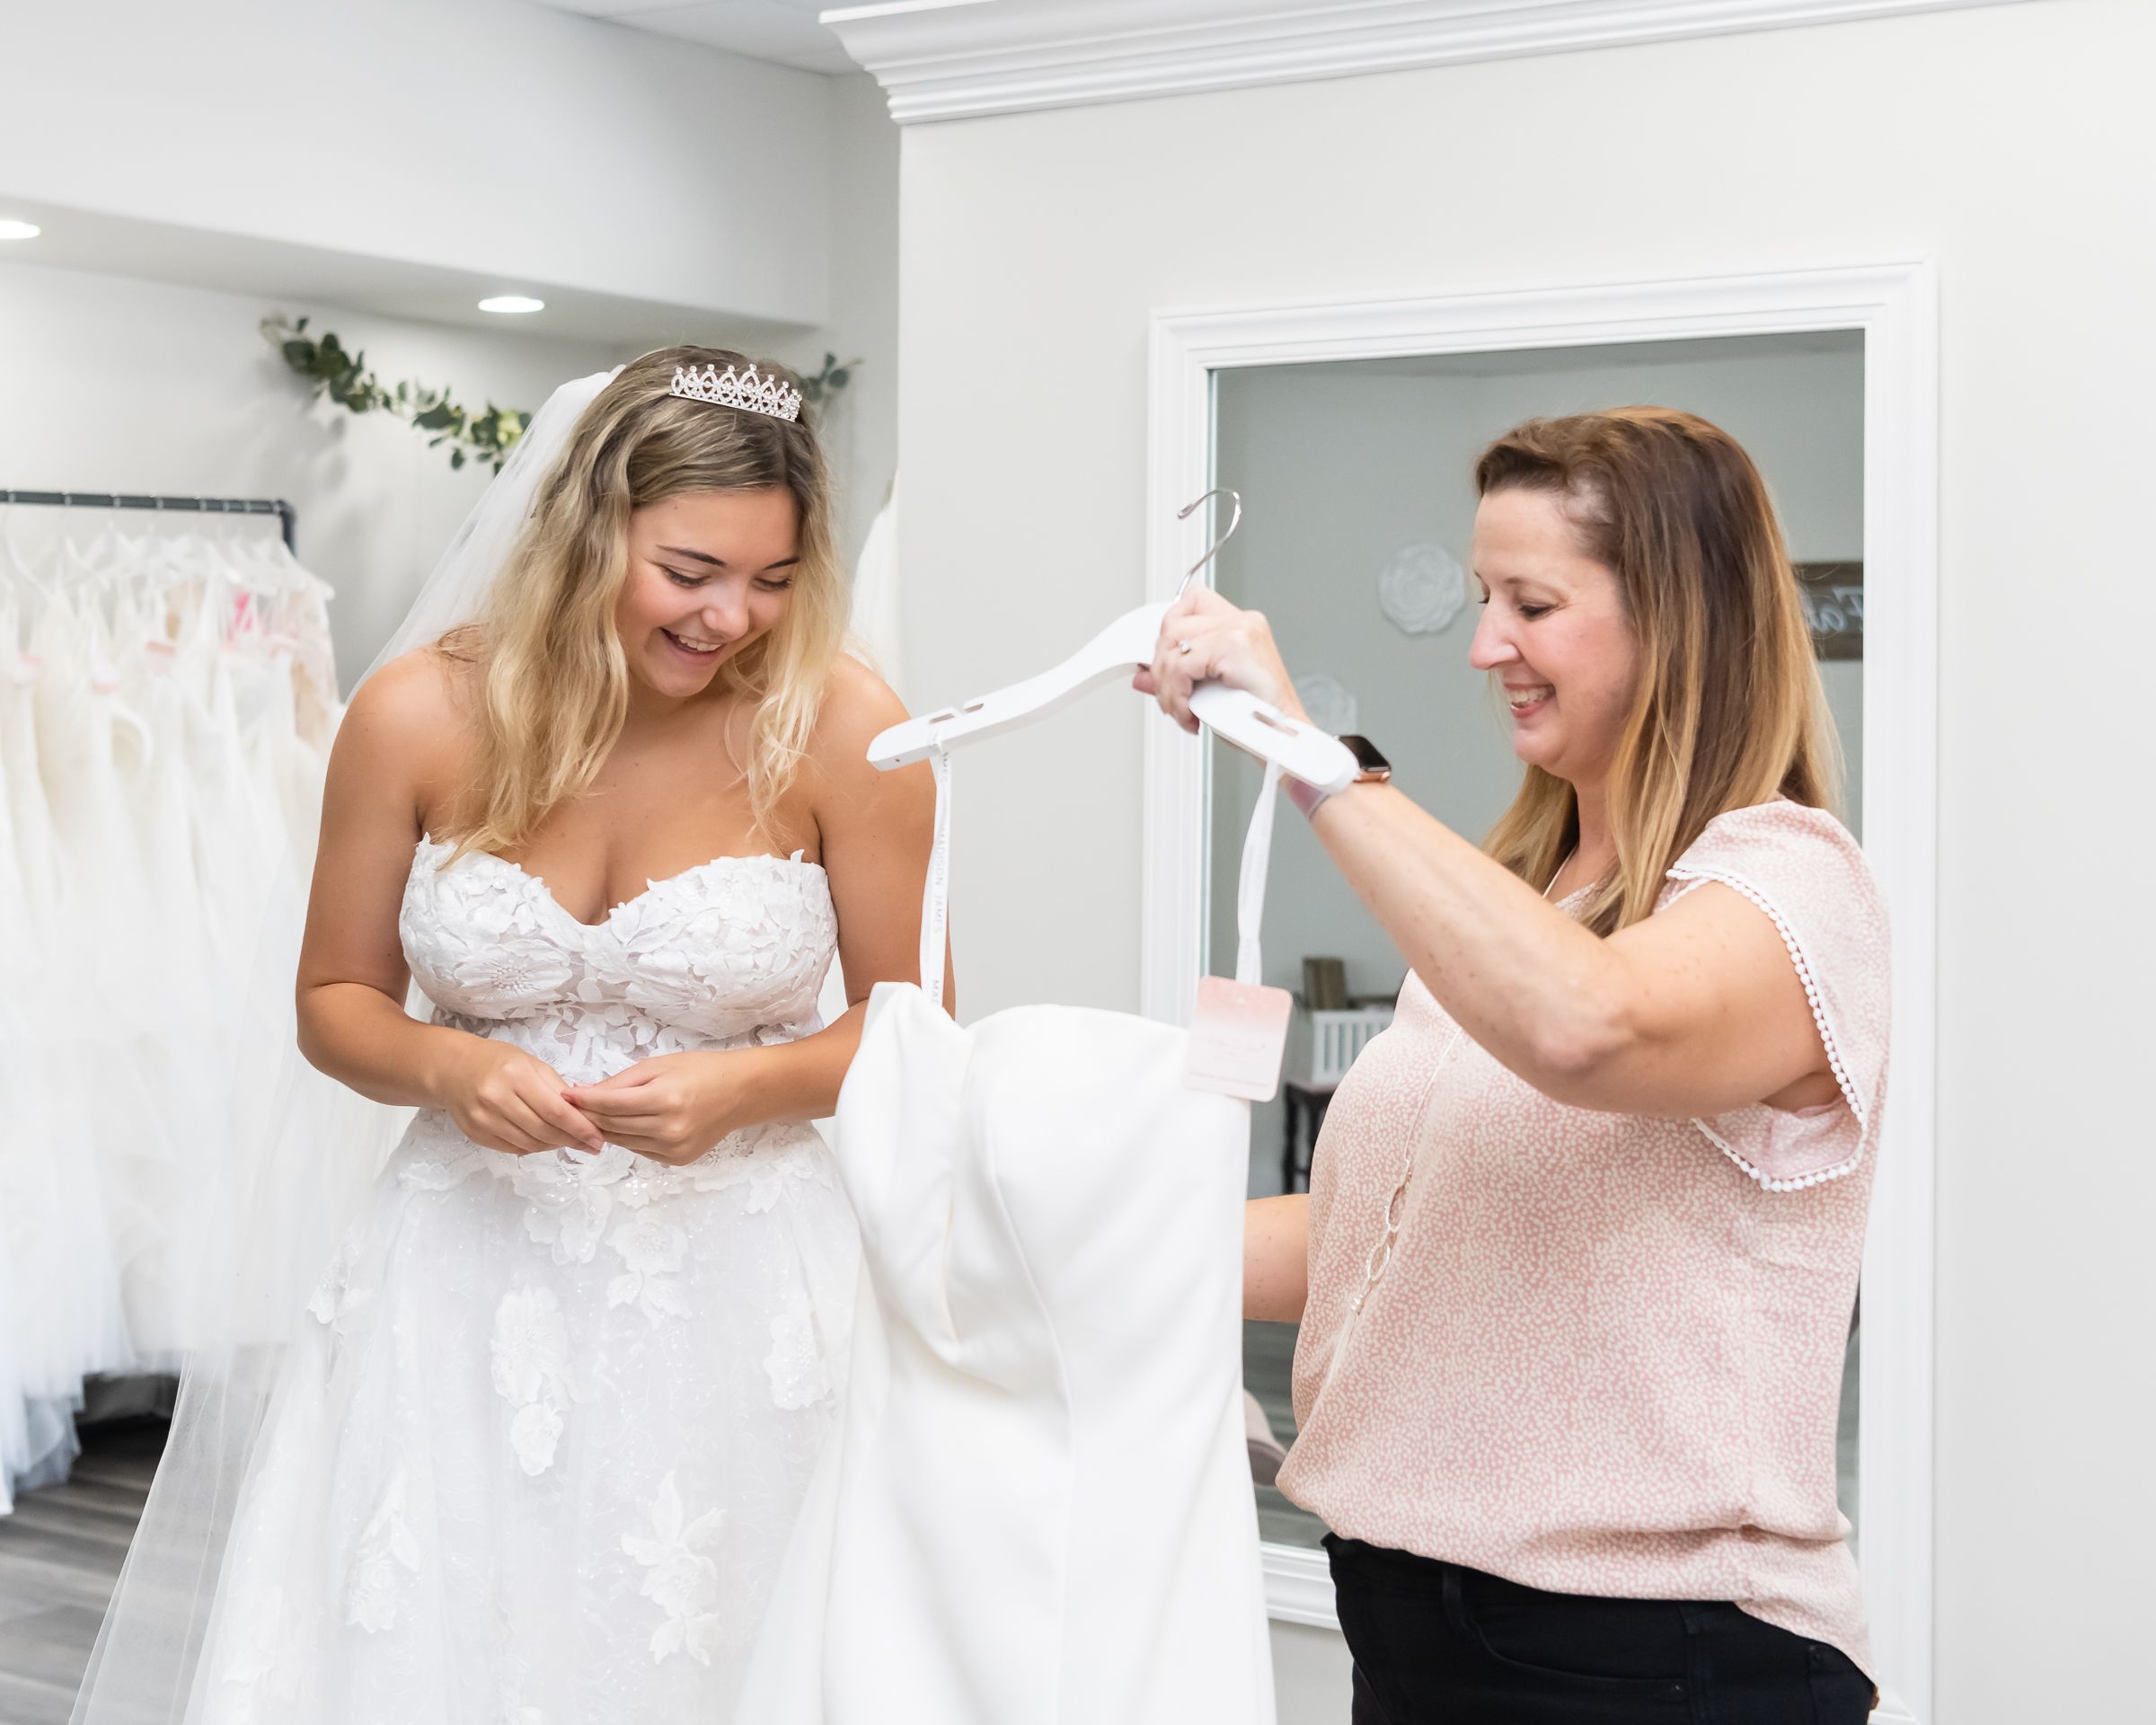 Sara Cook, co-owner of Fallen In Love Bridal helps a bride find a dress.